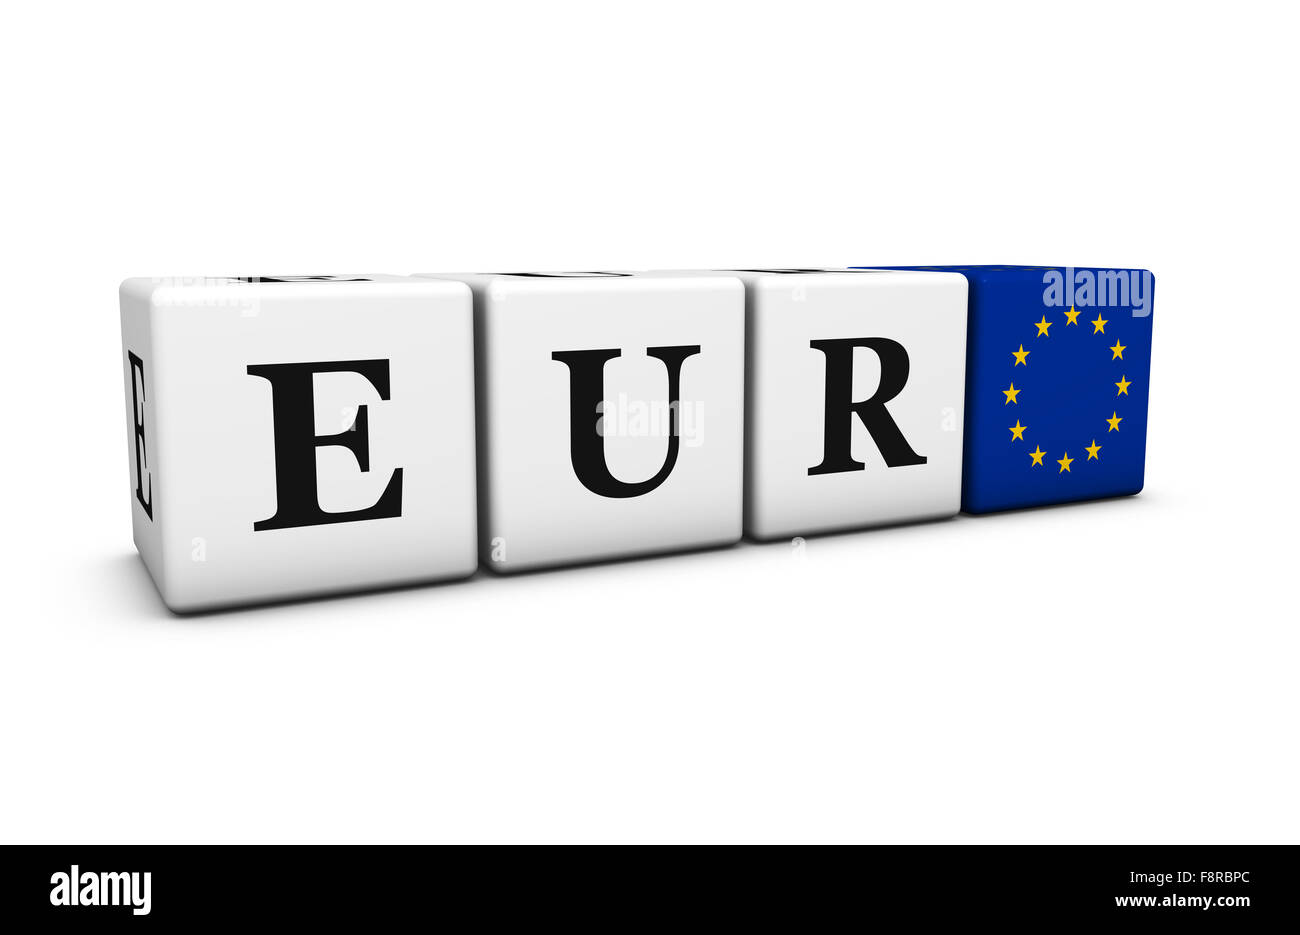 Currency rates, exchange stock market and financial trading concept with eur euro code sign and European Union flag on cubes. Stock Photo